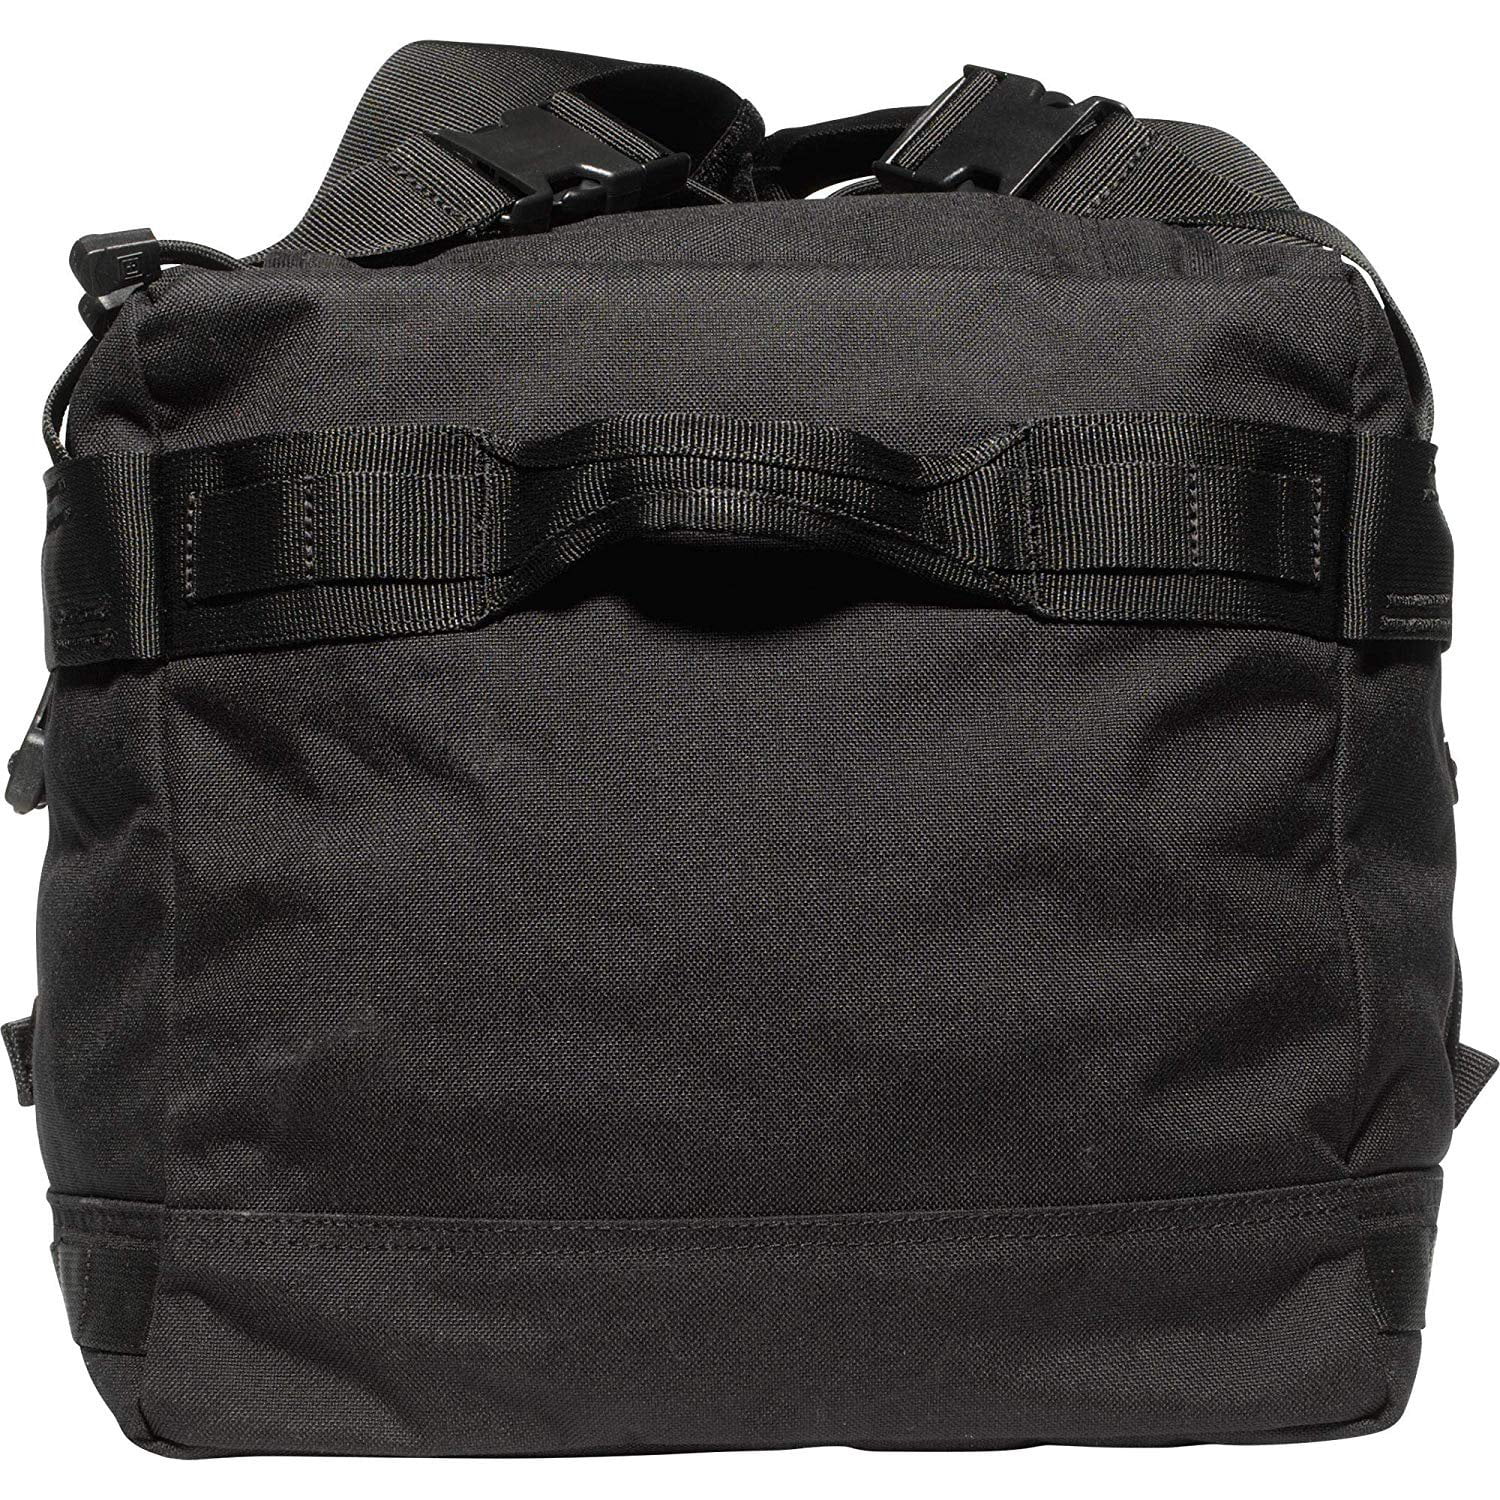 5.11 Tactical Rush LBD Lima Bag Water-Resistant 1050D Nylon MOLLE Style 56294 